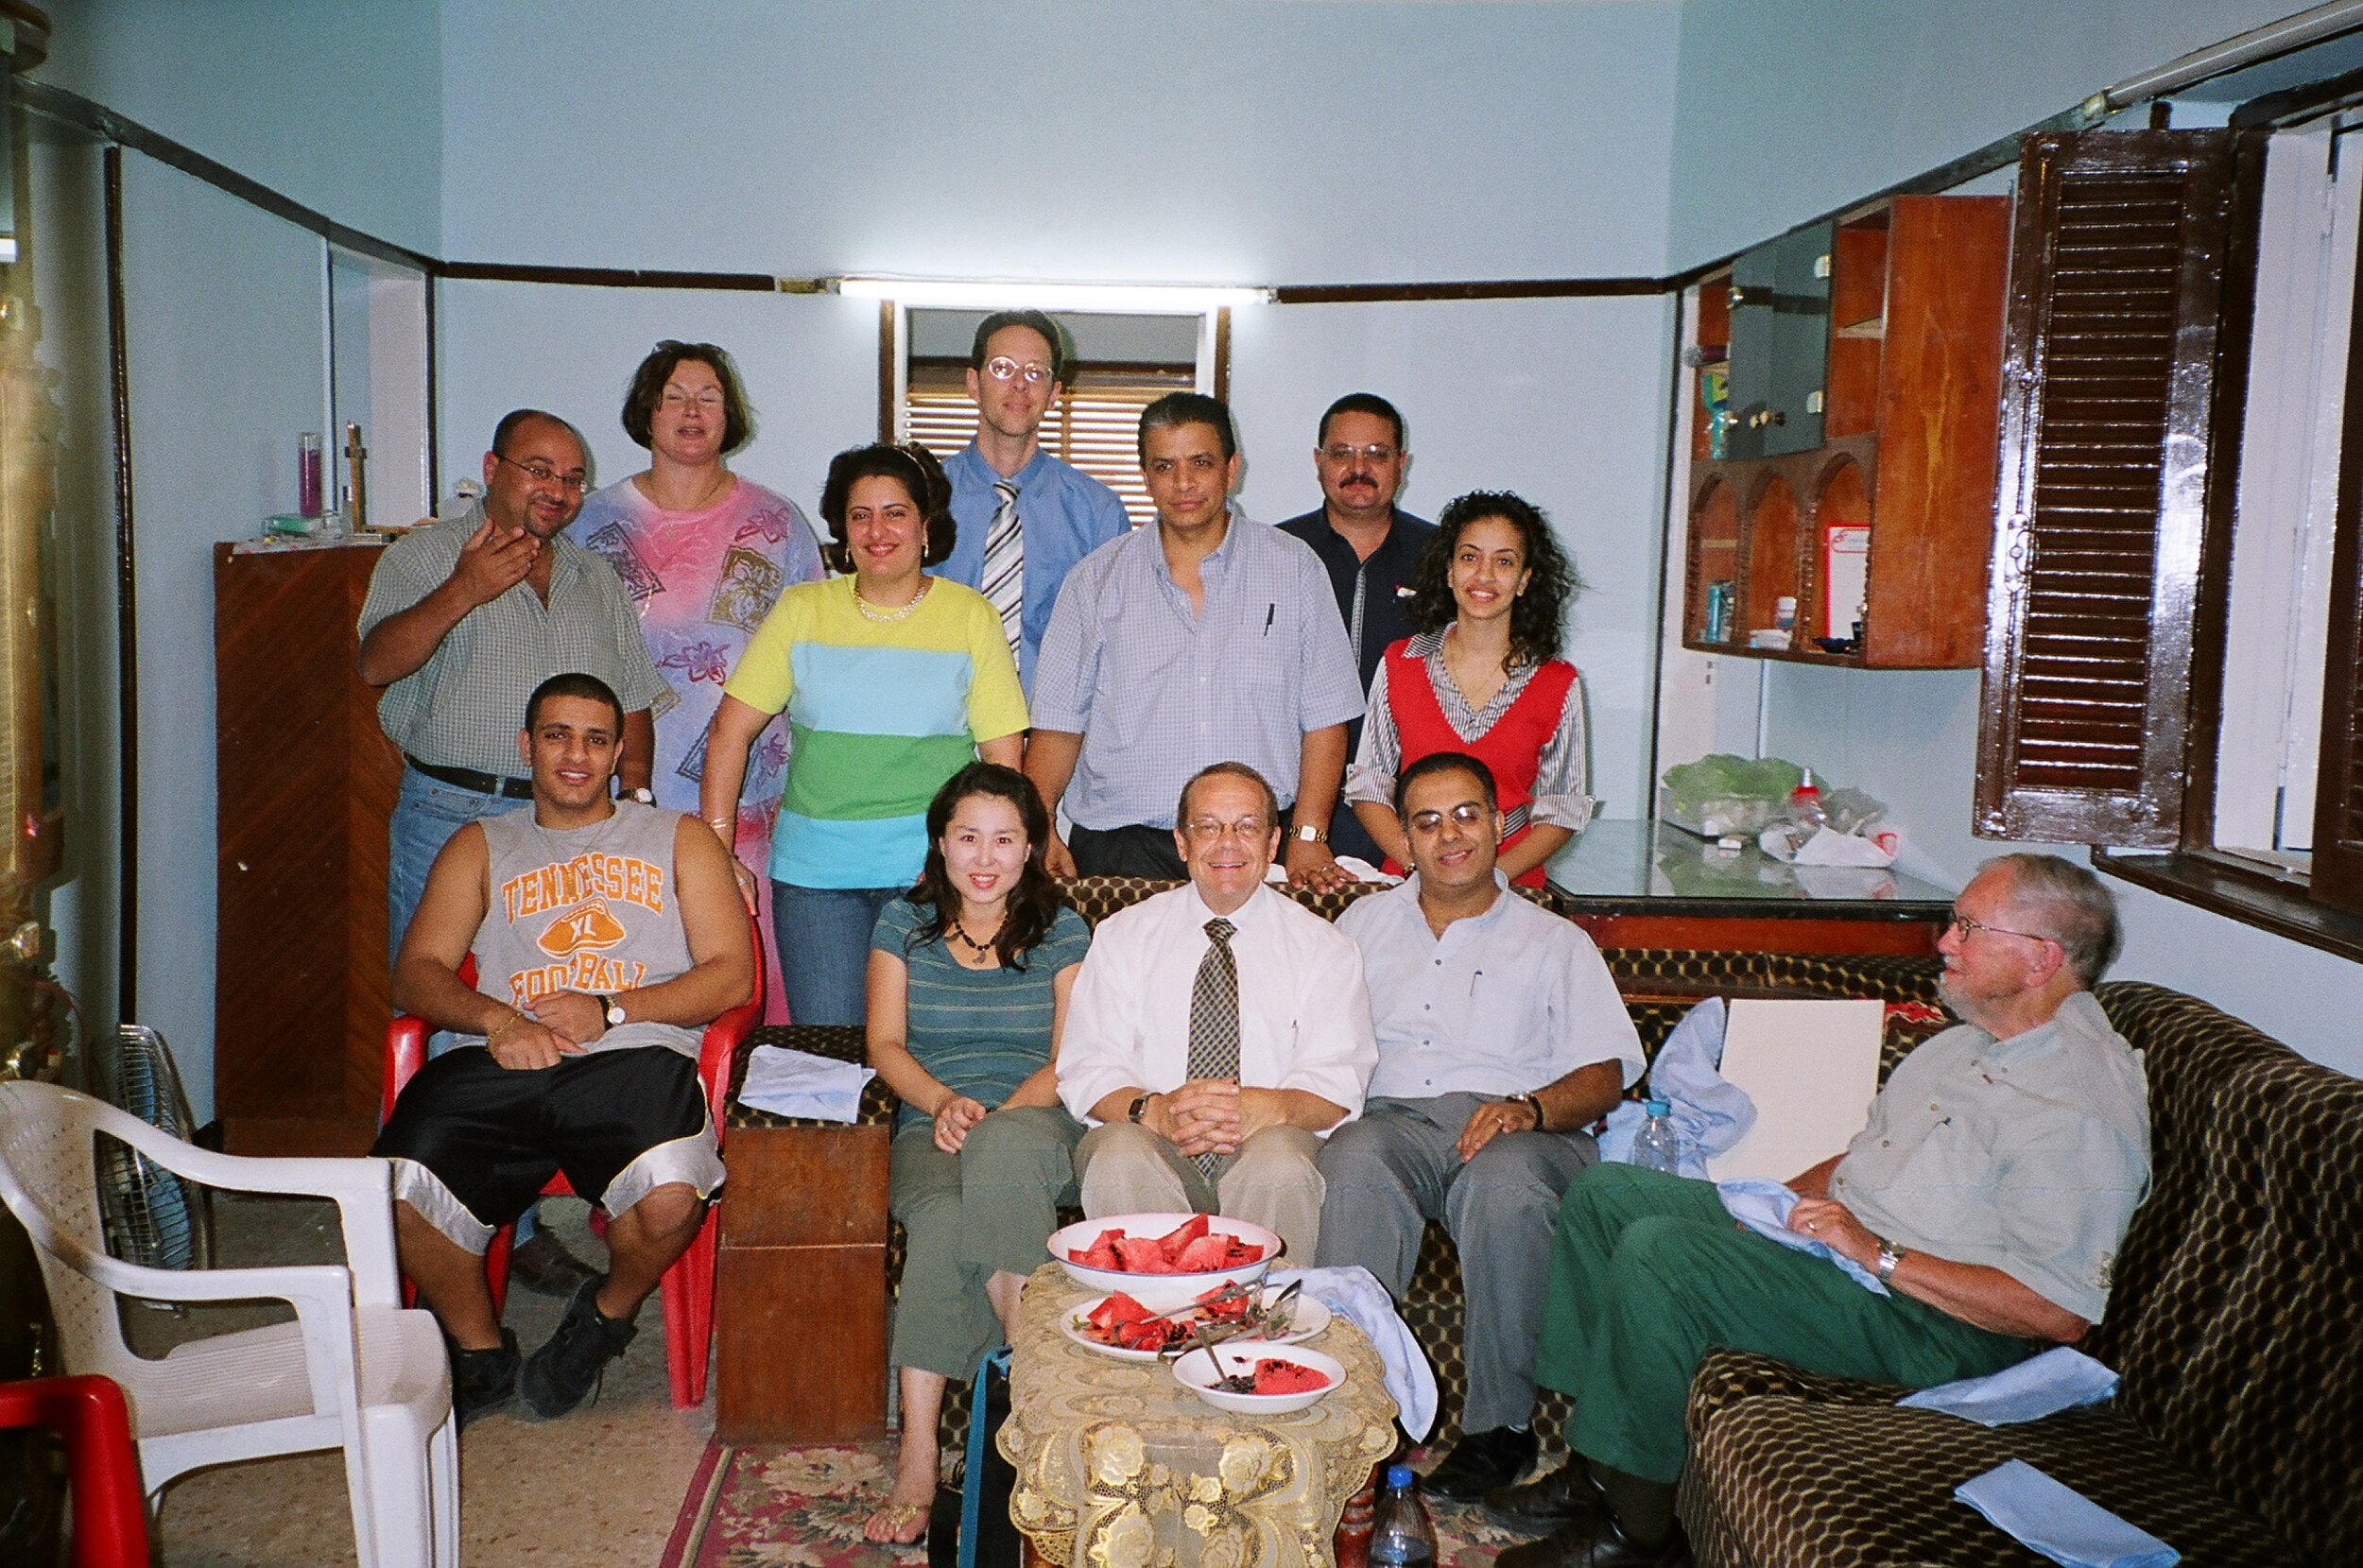  Amal and Ishak Abdelnour, standing in middle with two of their children on either side of them, as they welcome an Outreach delegation to their hometown of Tayyaba in 2007  